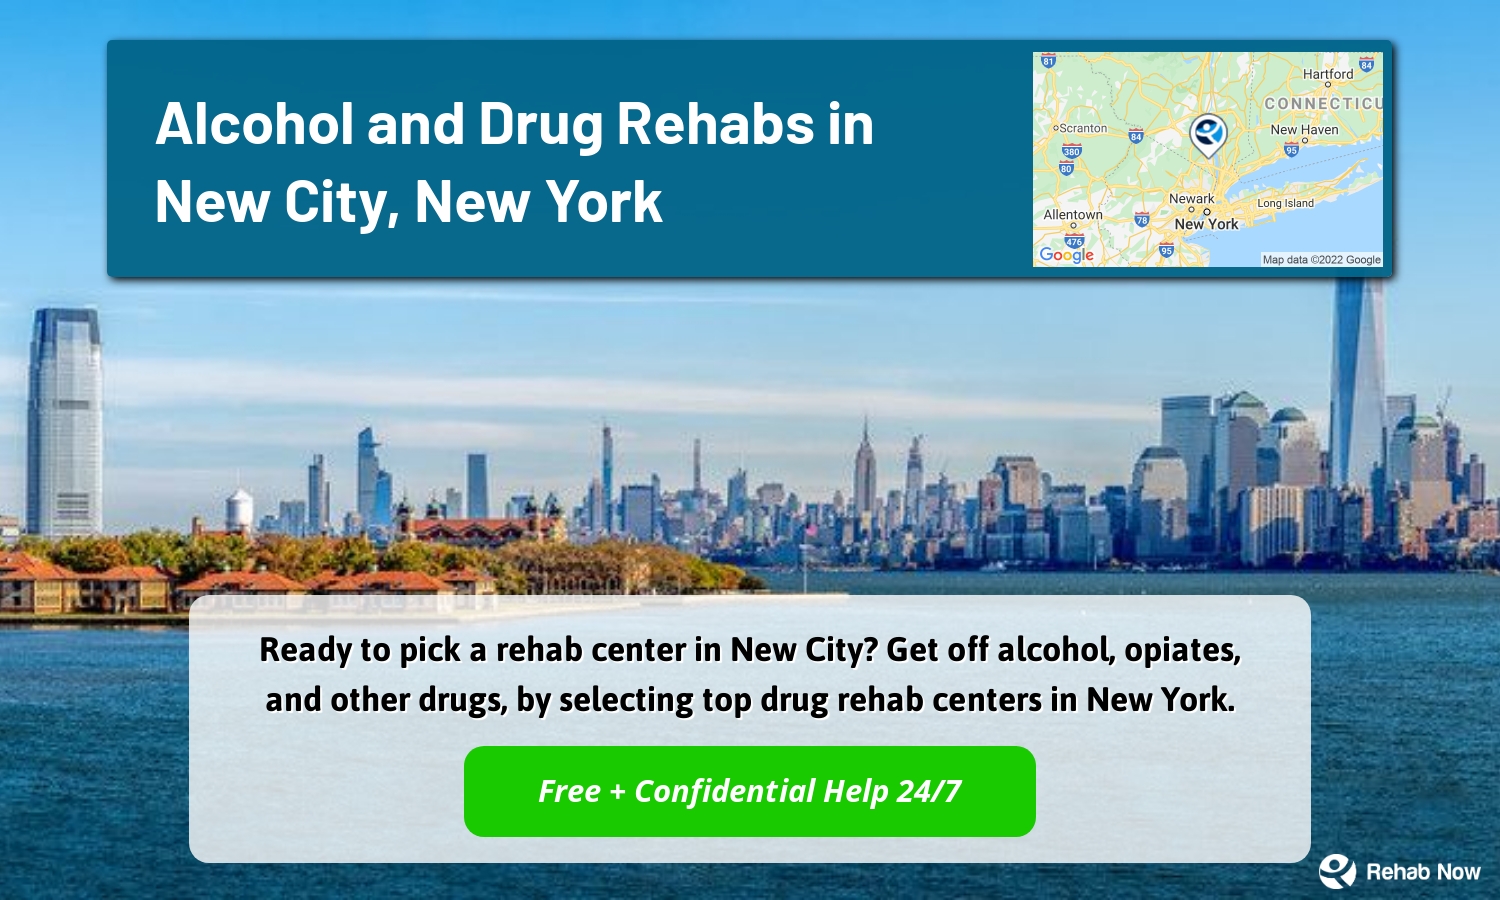 Ready to pick a rehab center in New City? Get off alcohol, opiates, and other drugs, by selecting top drug rehab centers in New York.